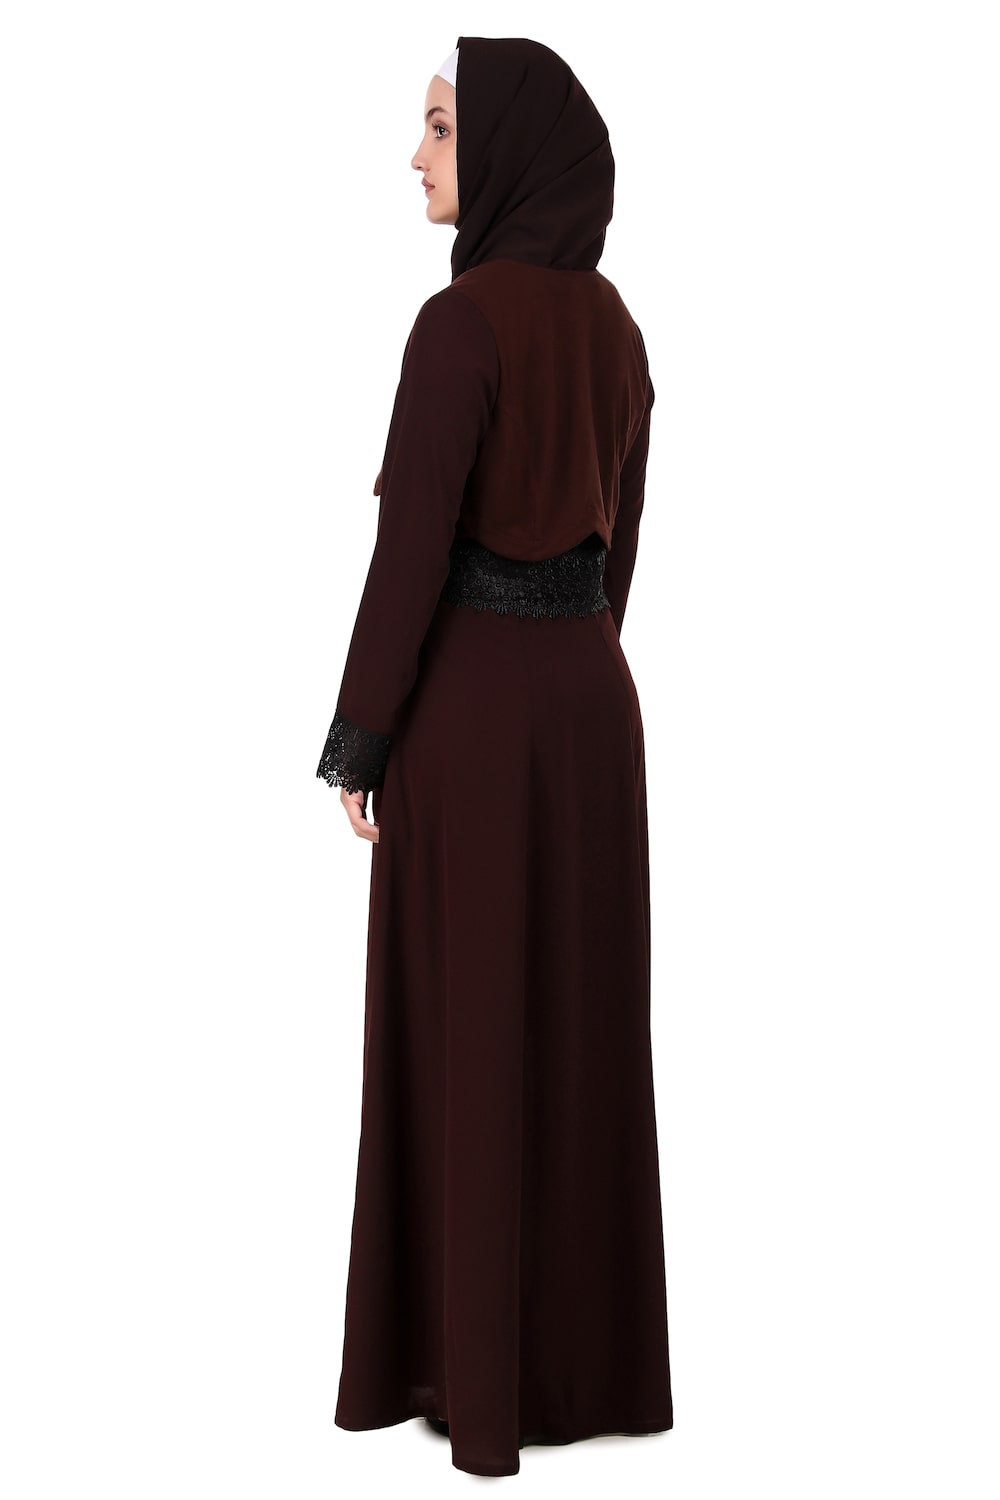 Brown Nida and Jersey Fancy Lace Abaya